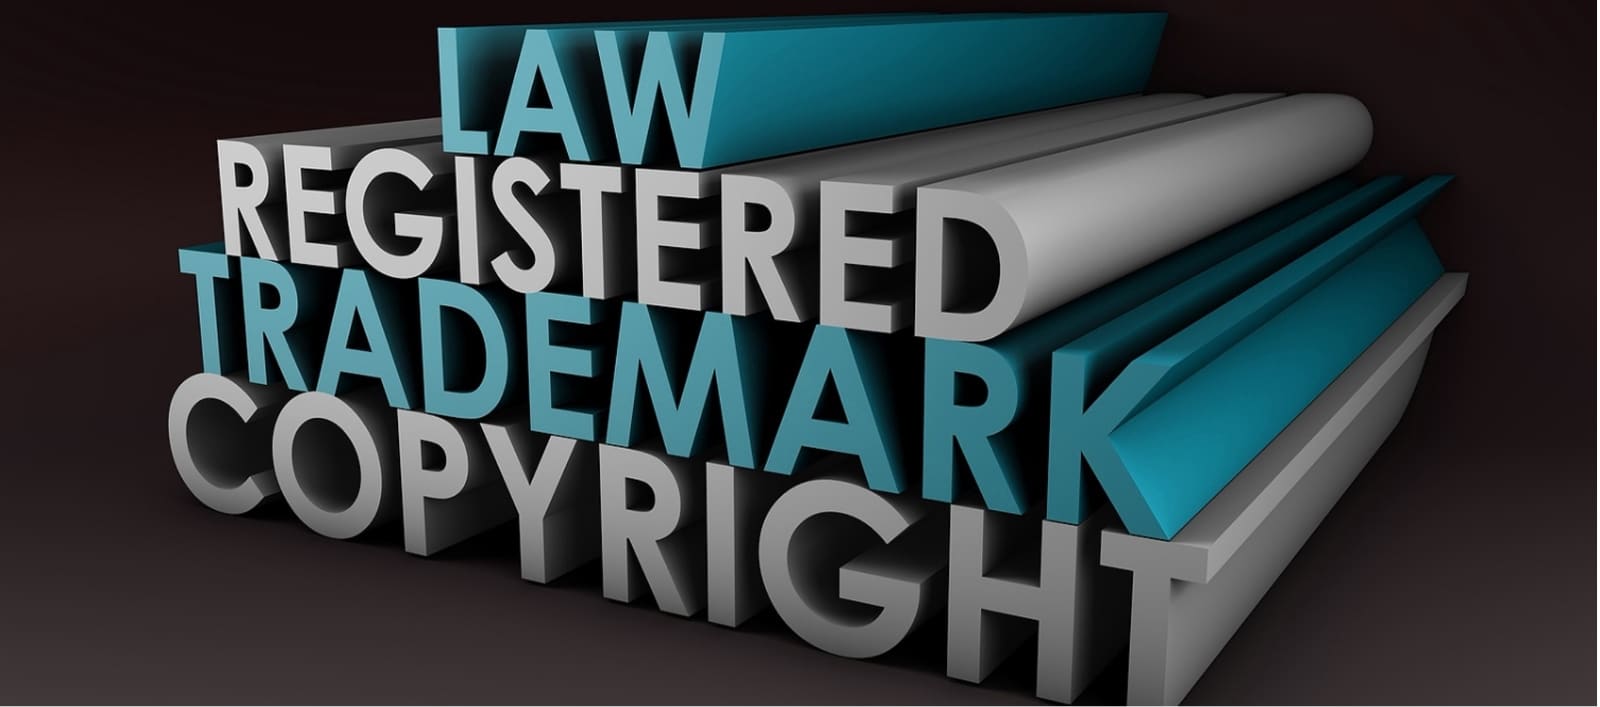 Trademarks and copyrights